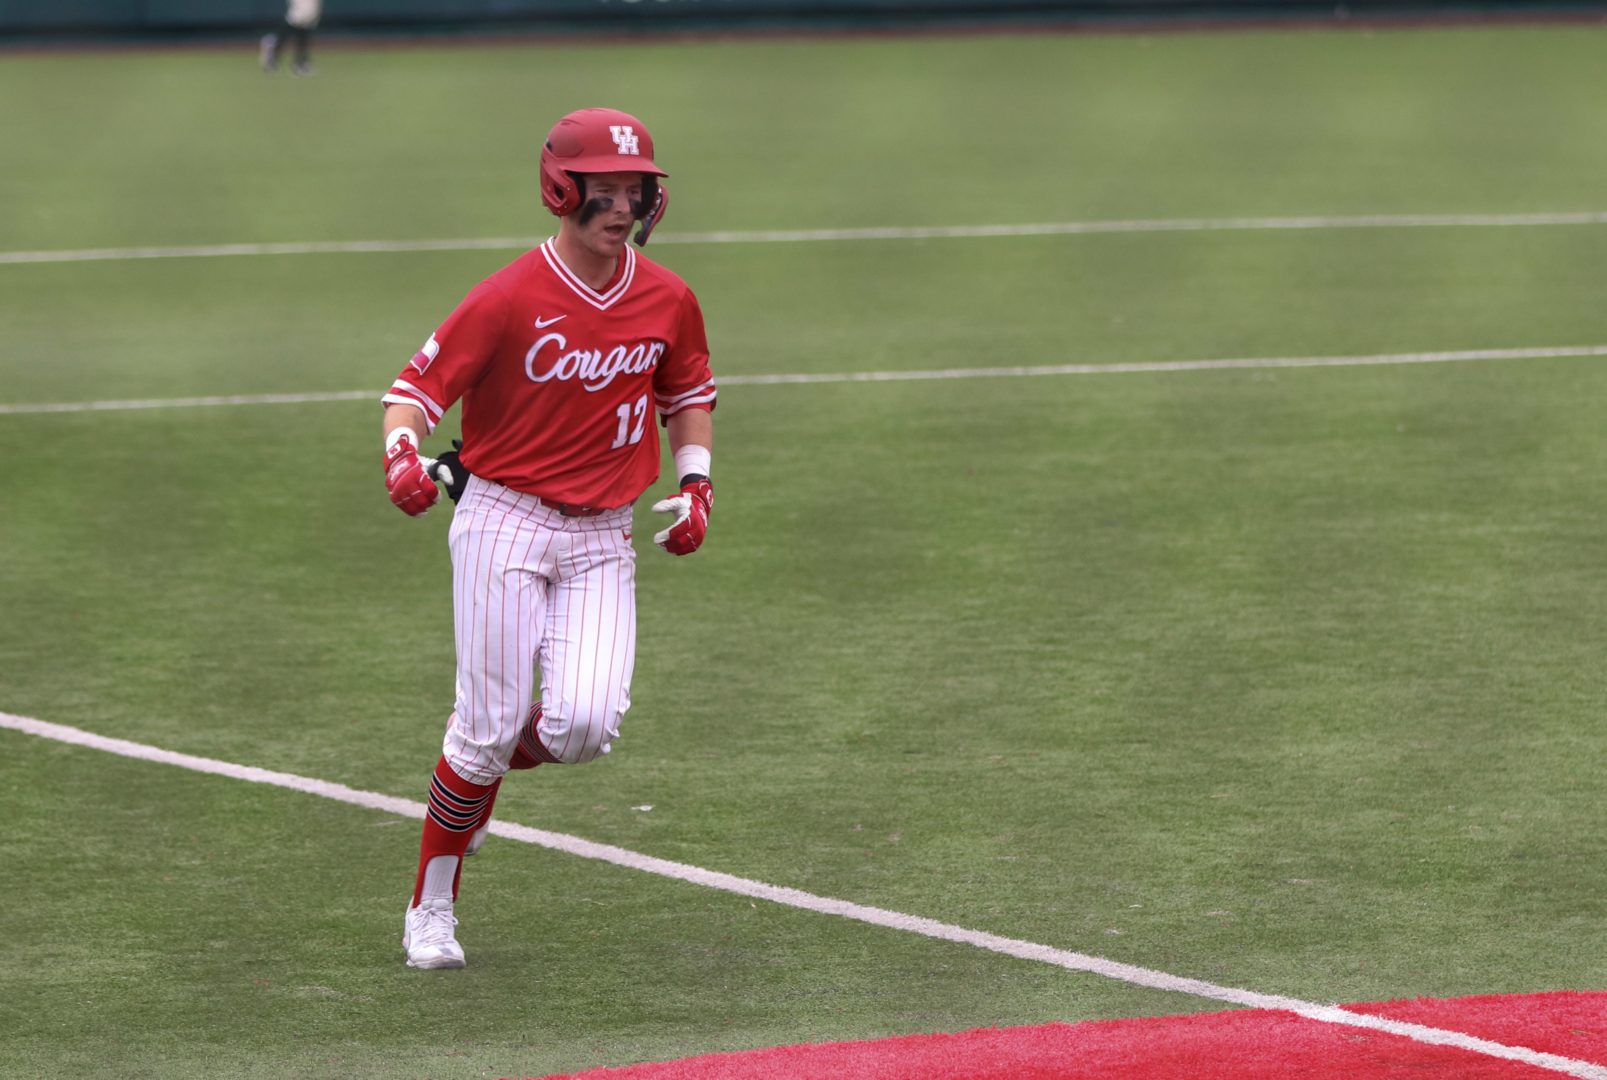 Ian McMillan hit what proved to be the game-winning two-run home run over Tulane on Saturday afternoon. | James Mueller/The Cougar